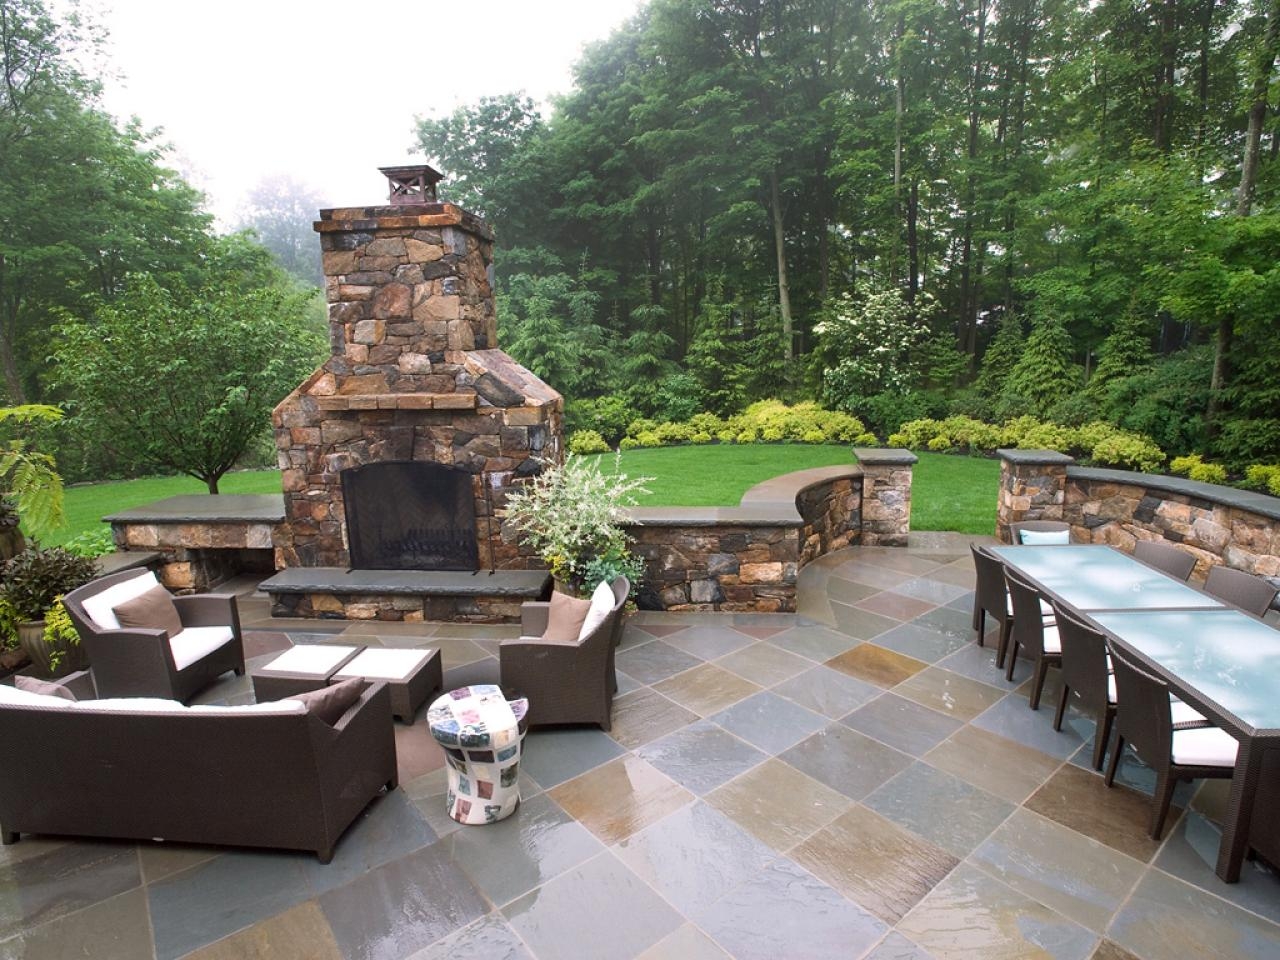 outdoor patio and fireplace ideas outdoor patio and fireplace ideas lovely outdoor patio fireplace ideas